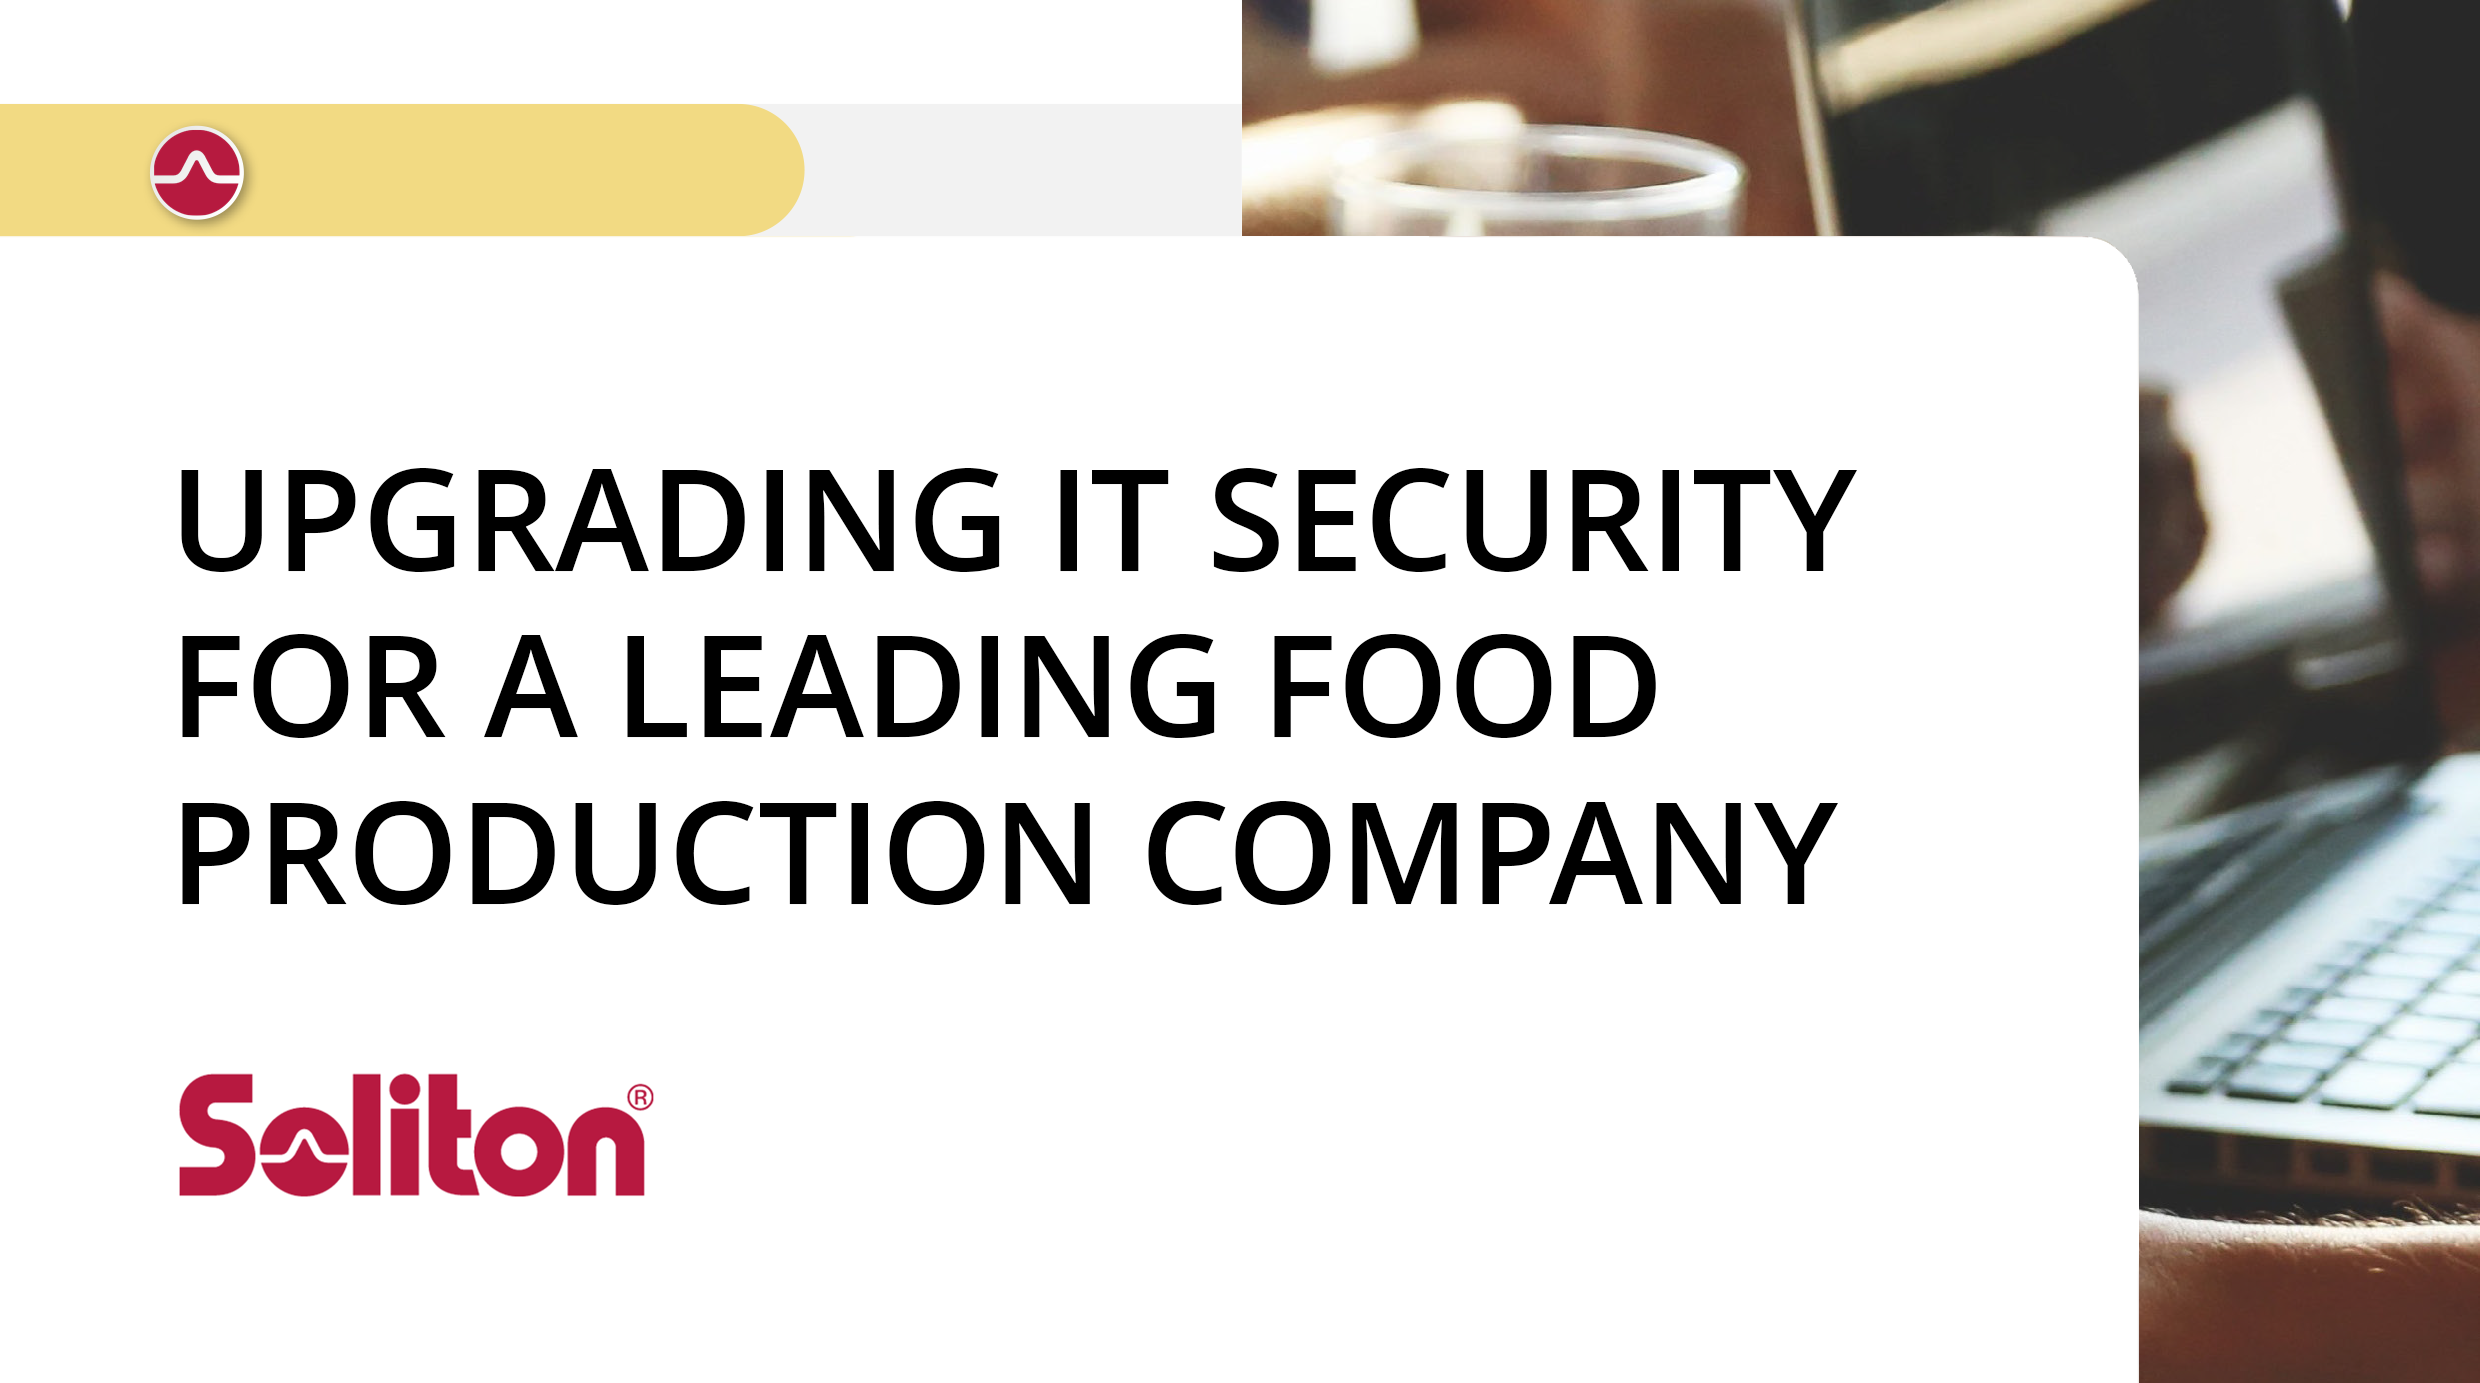 Soliton Case Study  - Upgrading IT security for a leading food production company